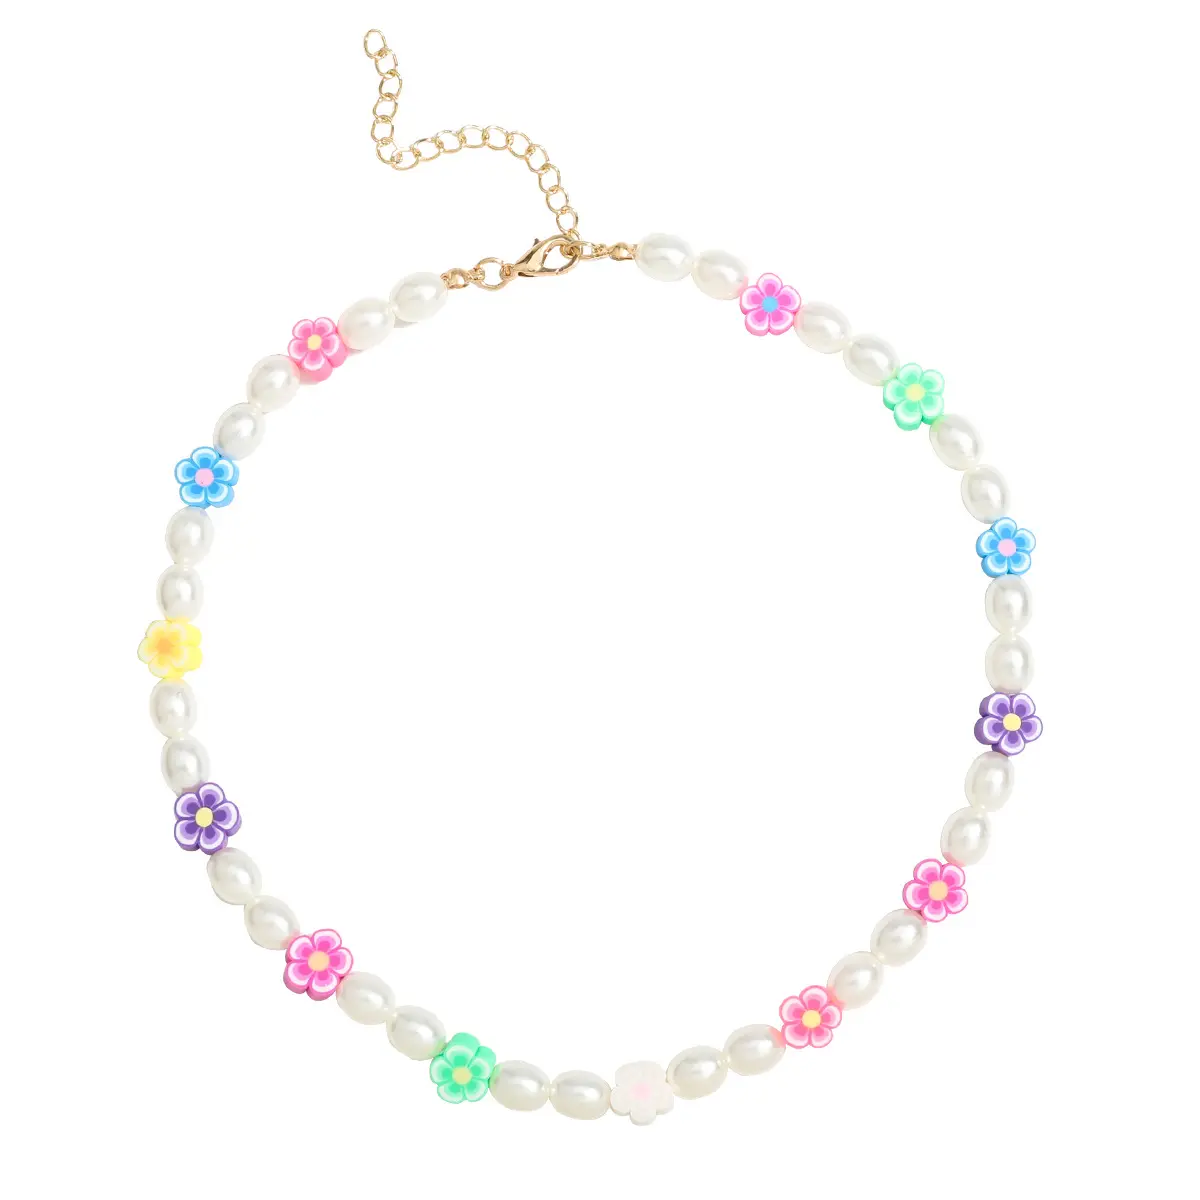 Trendy Y2k Style For Women Girls Colorful Rubber Blooms Charm Beaded Choker Jewelry New Bohemian Imitation Pearl Flower Necklace